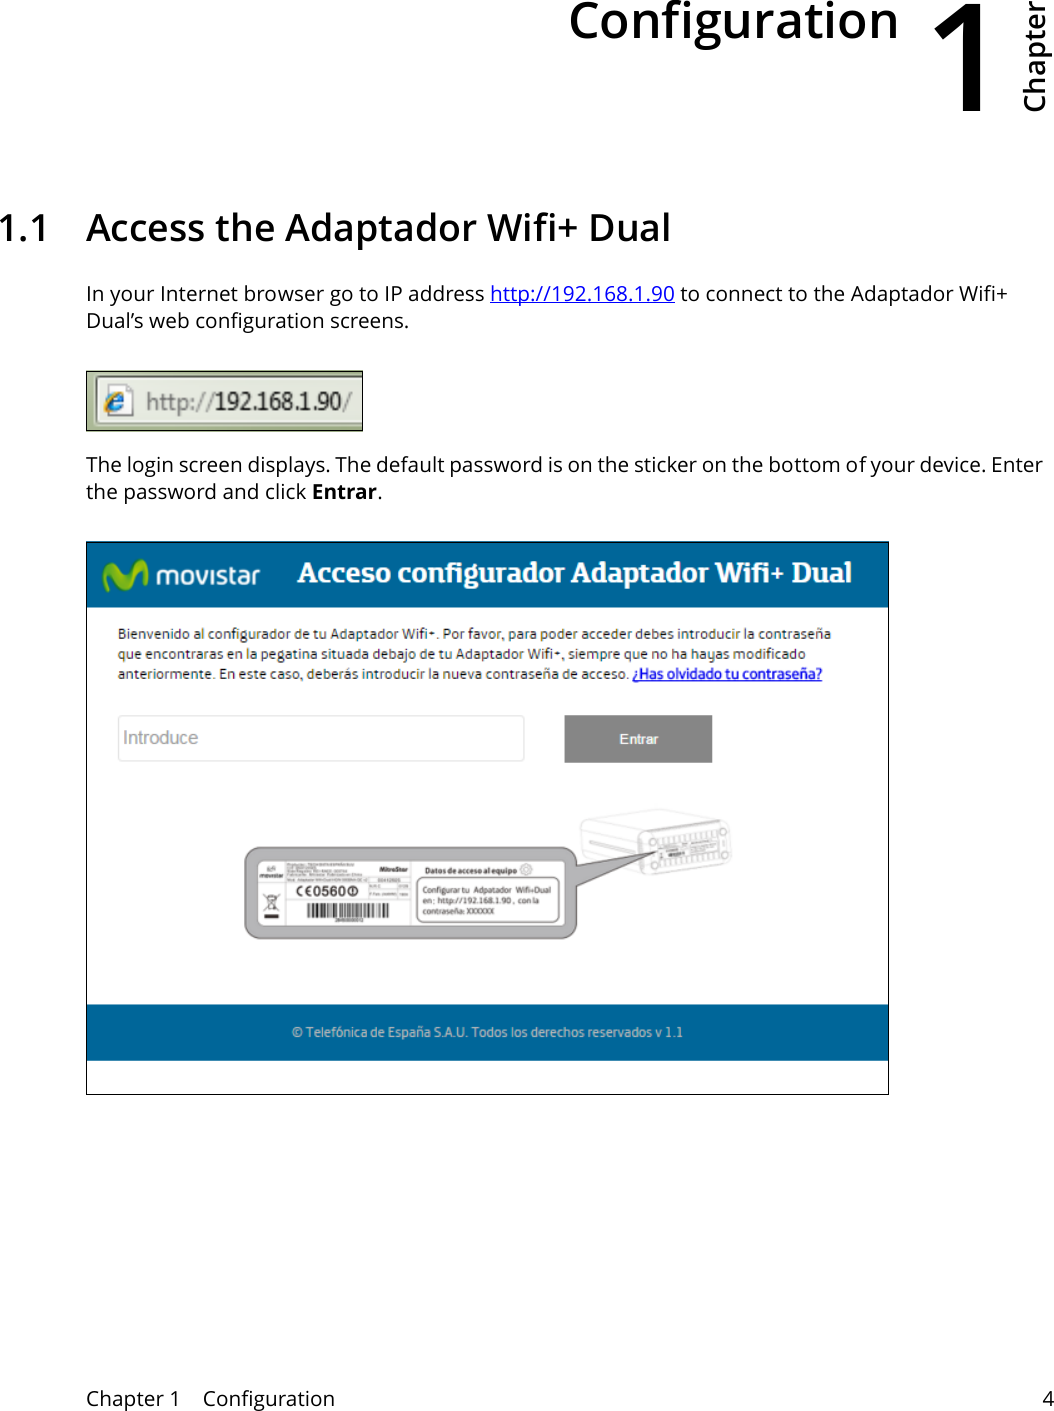 1Chapter Chapter 1    Configuration 4CHAPTER 1 Chapter 1Configuration1.1  Access the Adaptador Wifi+ DualIn your Internet browser go to IP address http://192.168.1.90 to connect to the Adaptador Wifi+ Dual’s web configuration screens. The login screen displays. The default password is on the sticker on the bottom of your device. Enter the password and click Entrar.Use t